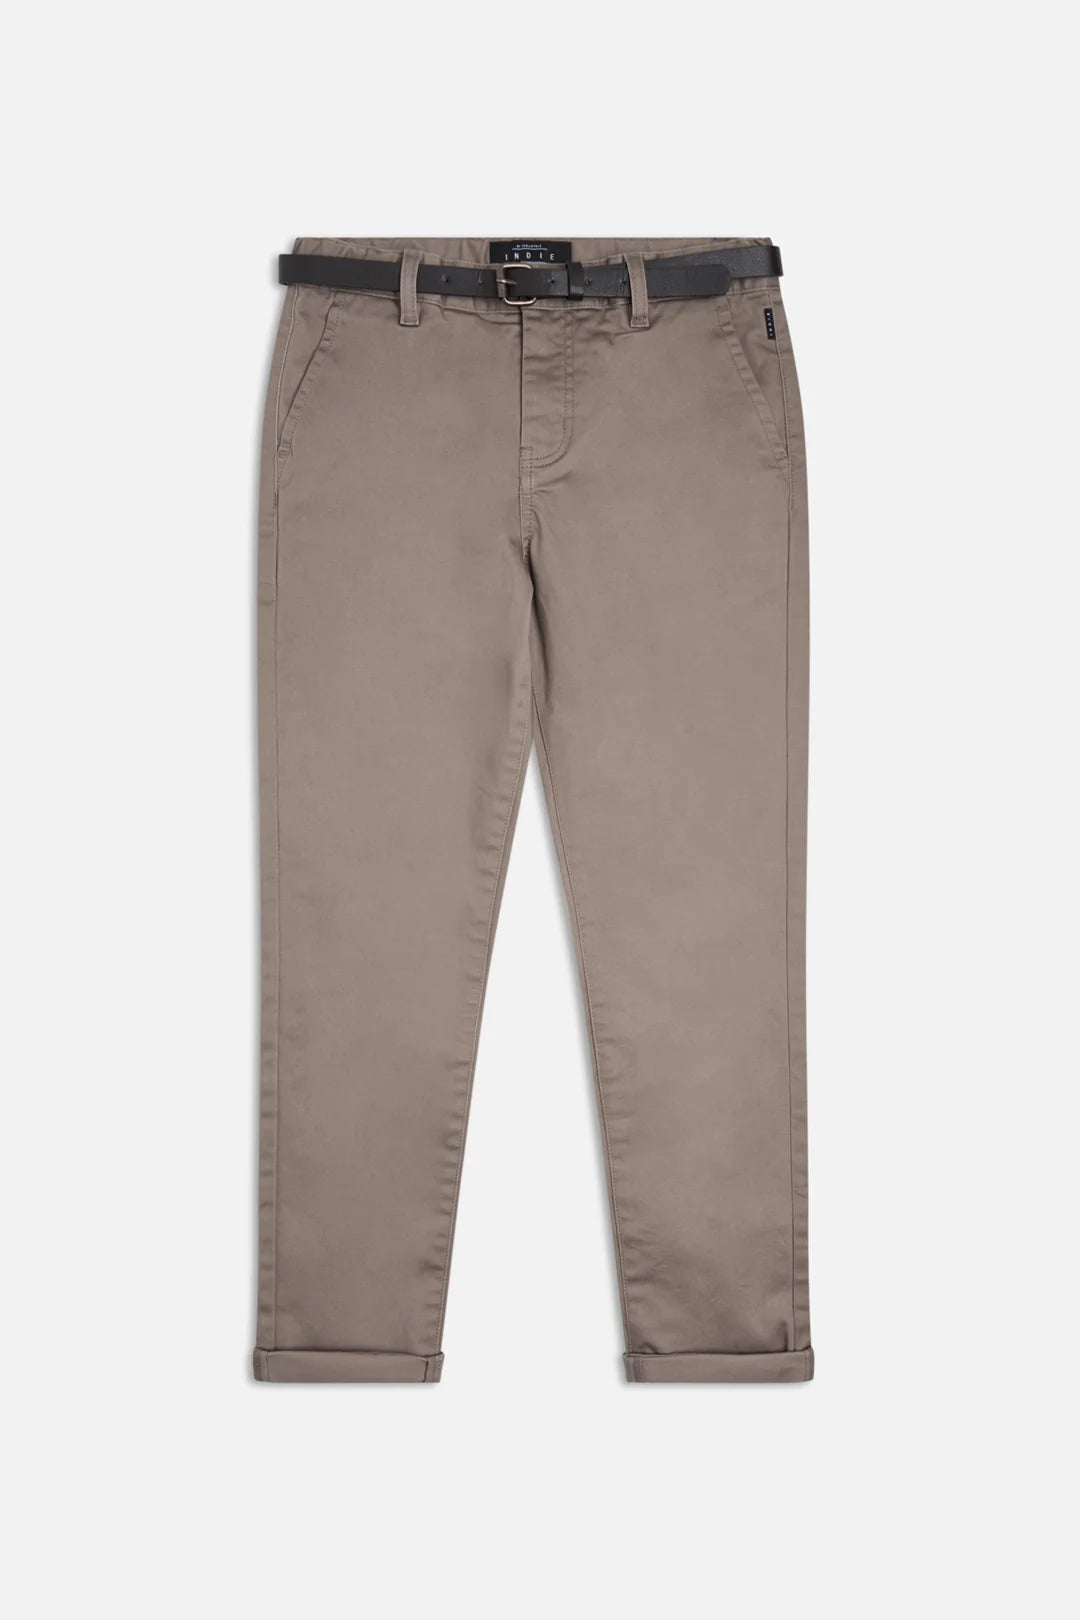 Indie Kids Cuba Stretch Chino - Clay (3-7 Years)